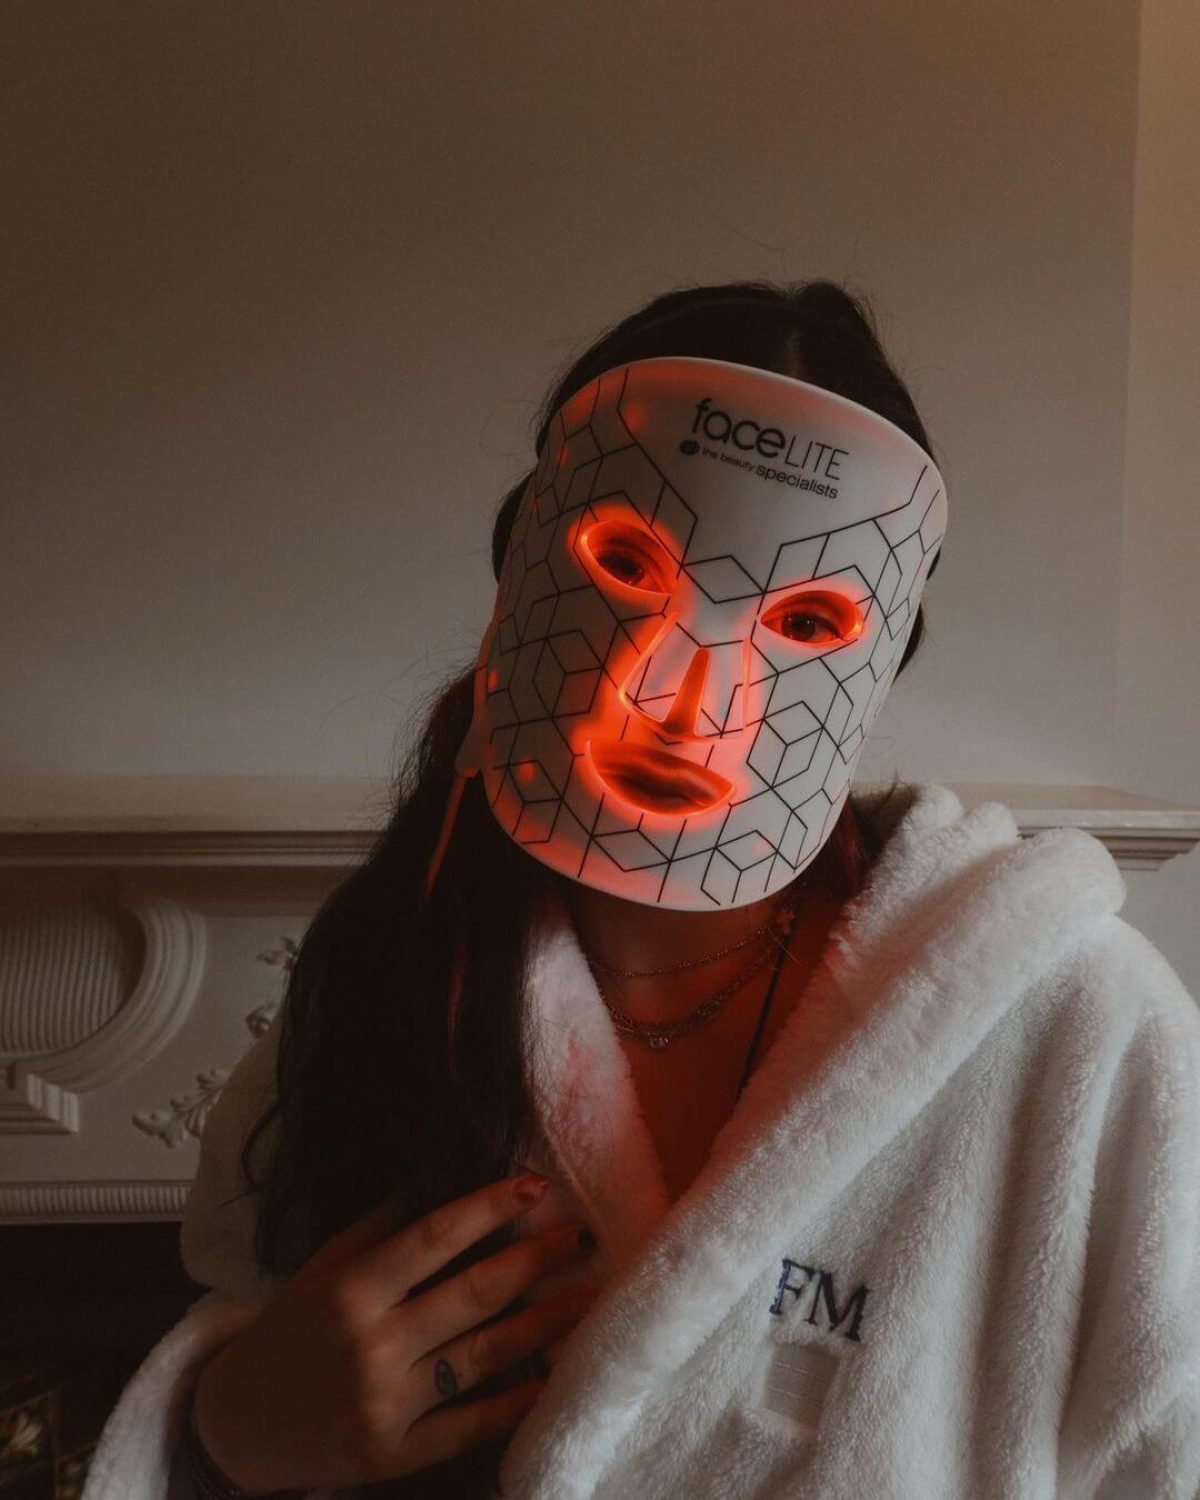 LED face review - is it worth it? - Beauty and travel from journalist Fani Mari | BREAKEVEN